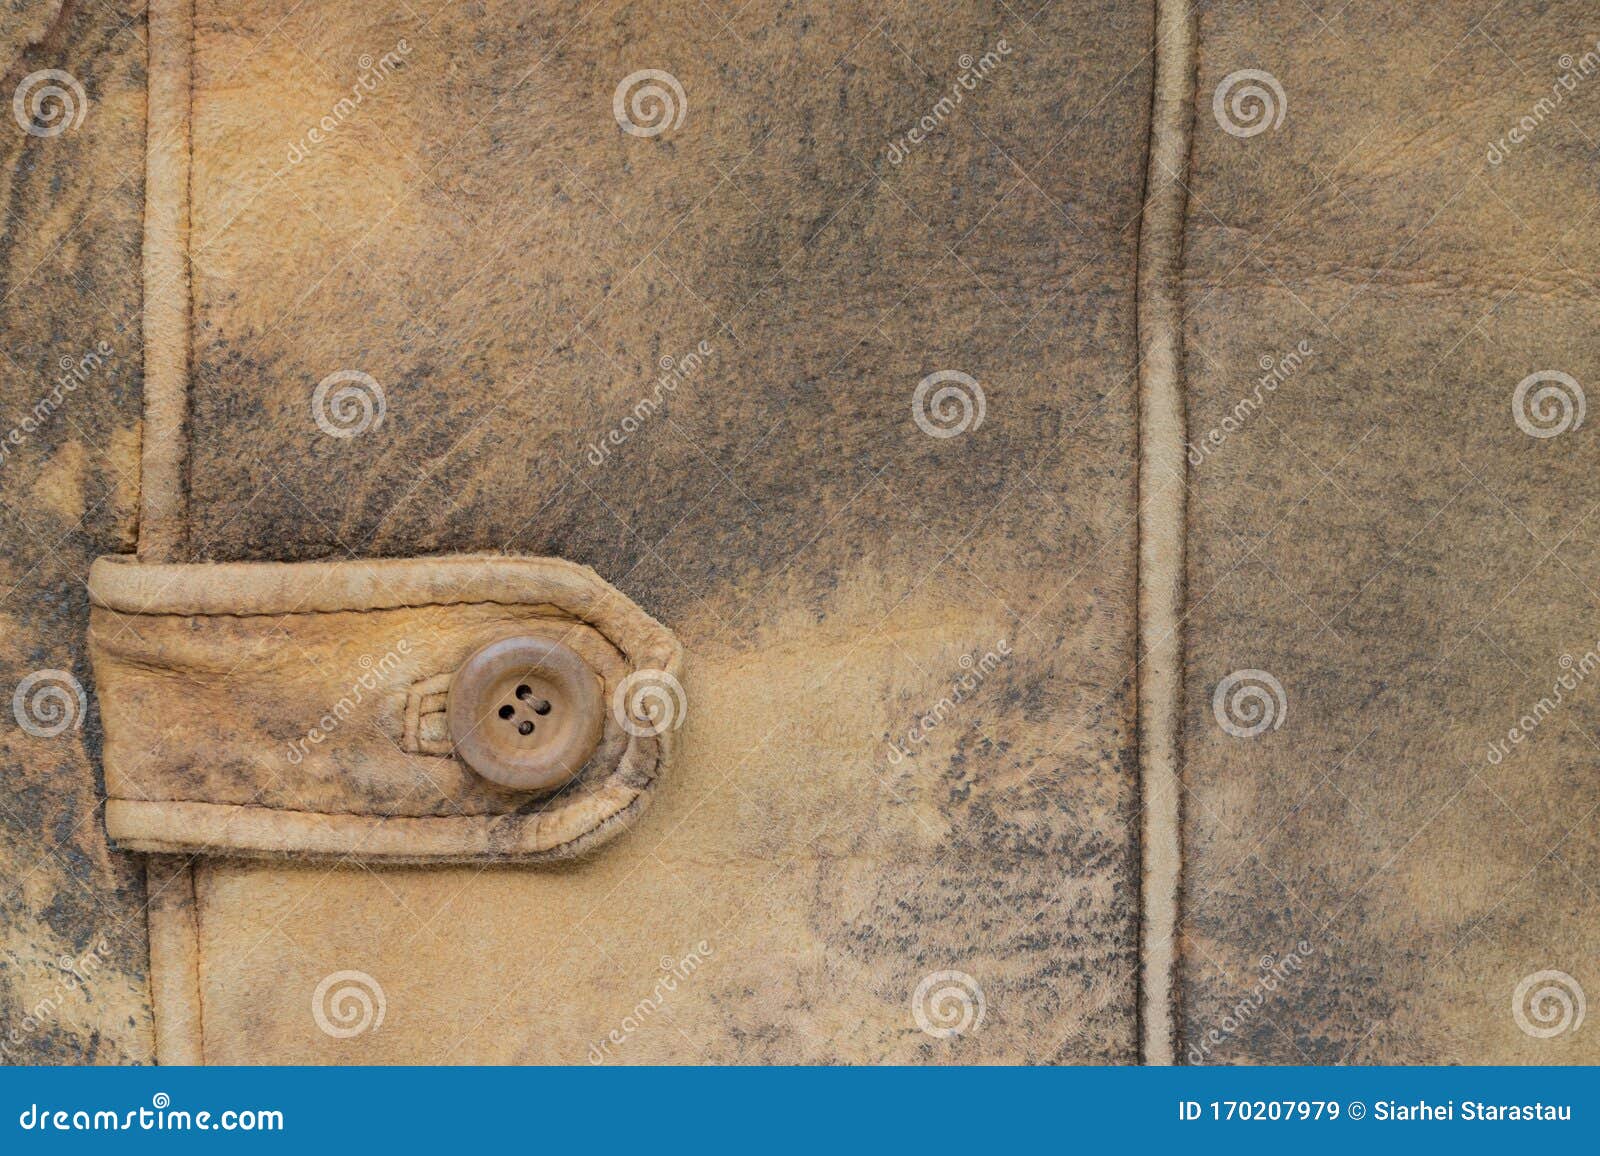 Fragment of a Jacket Made of Suede Leather Stock Image - Image of ...